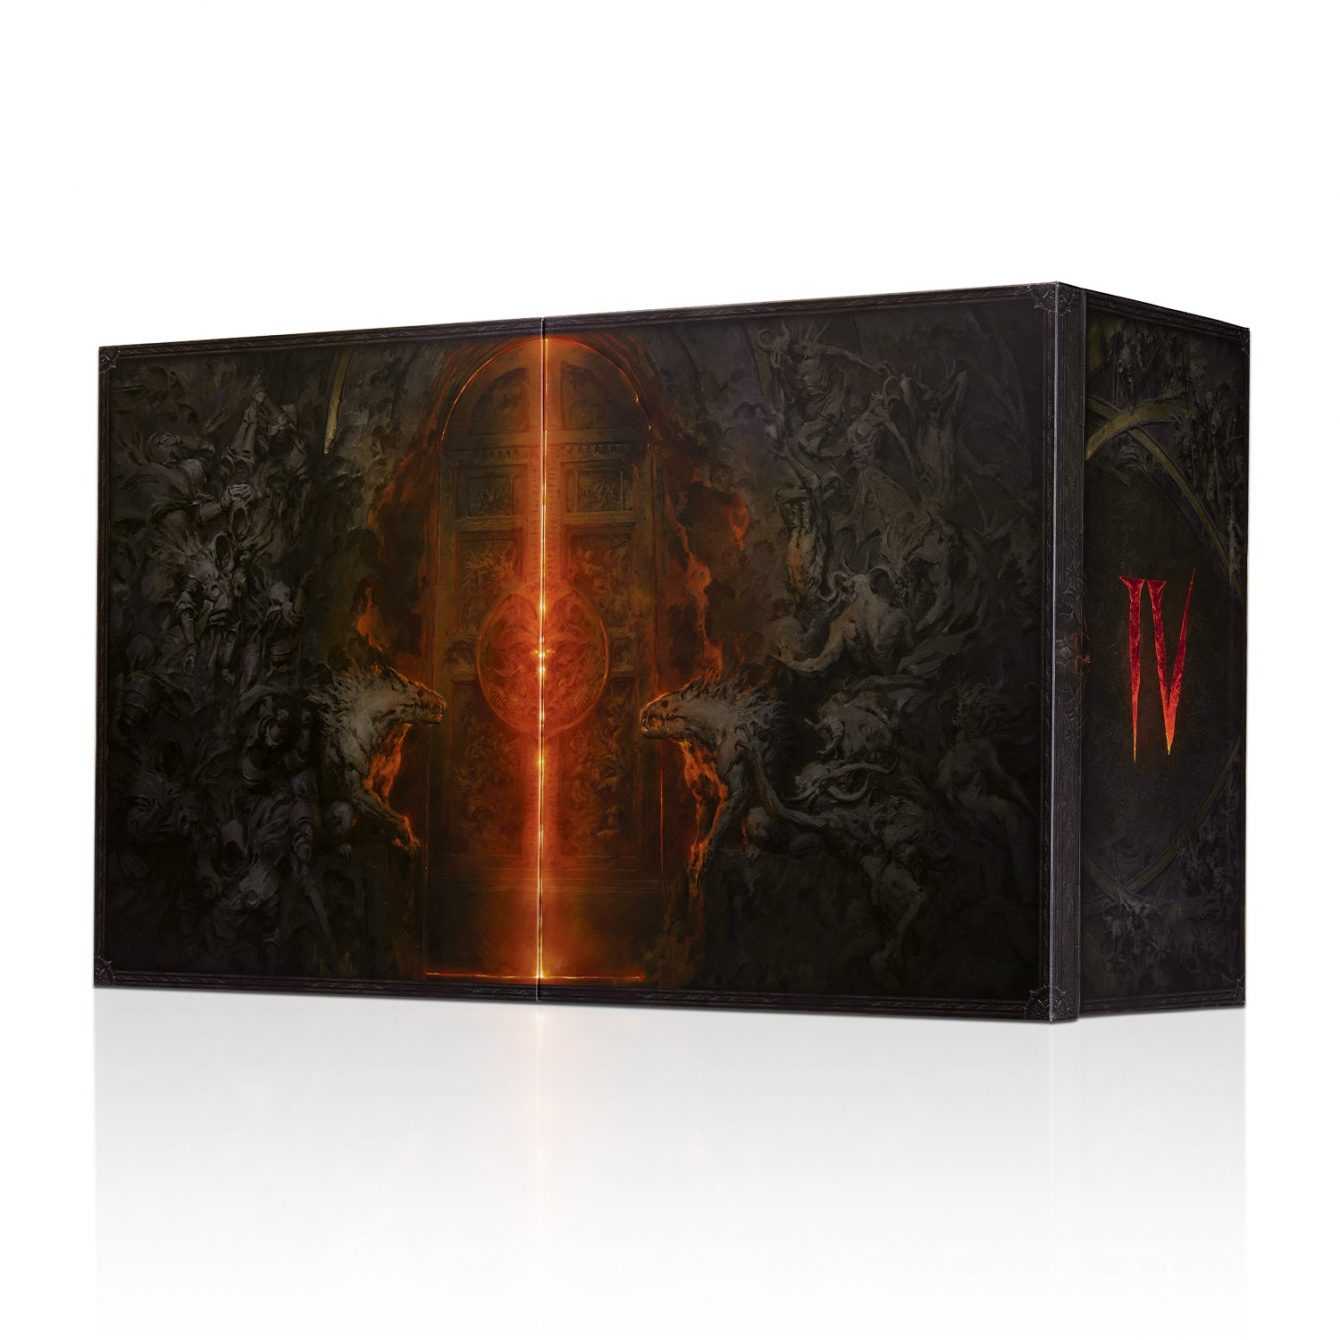 Diablo 4: pre-orders of the Limited Collector's Box are open